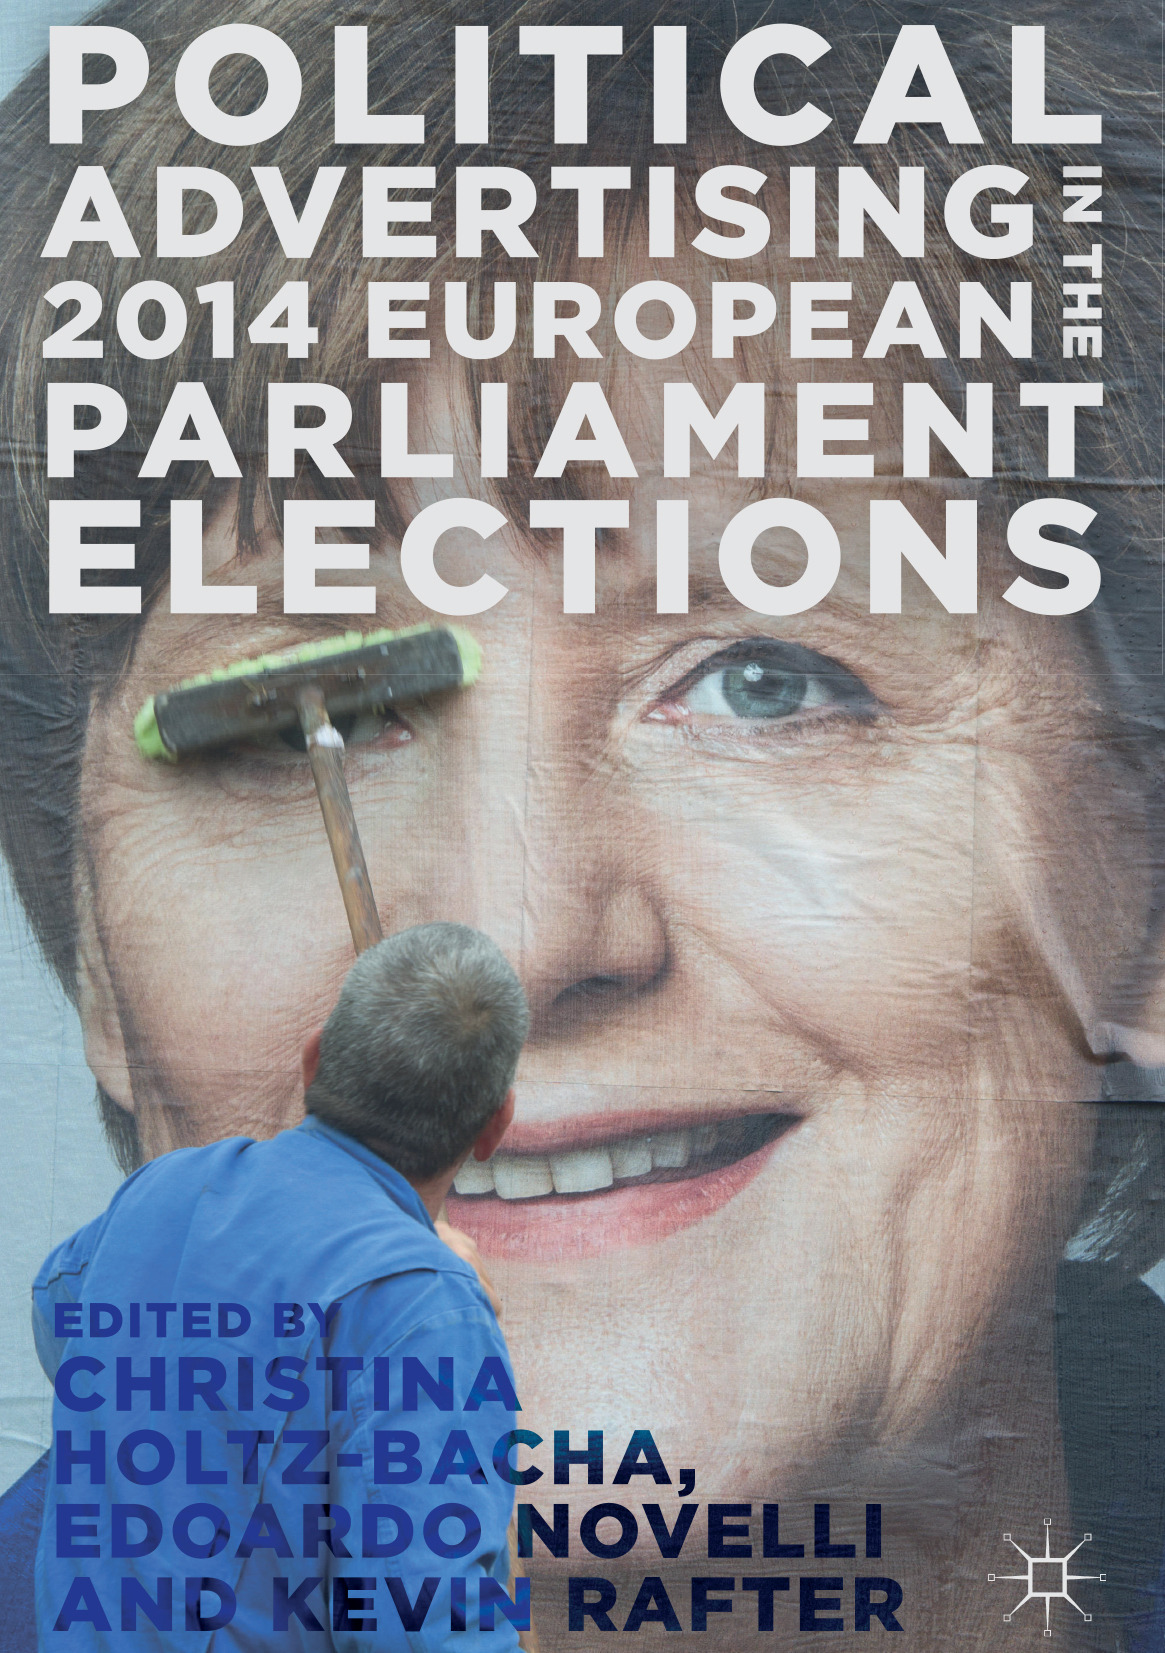 Holtz-Bacha, Christina - Political Advertising in the 2014 European Parliament Elections, ebook